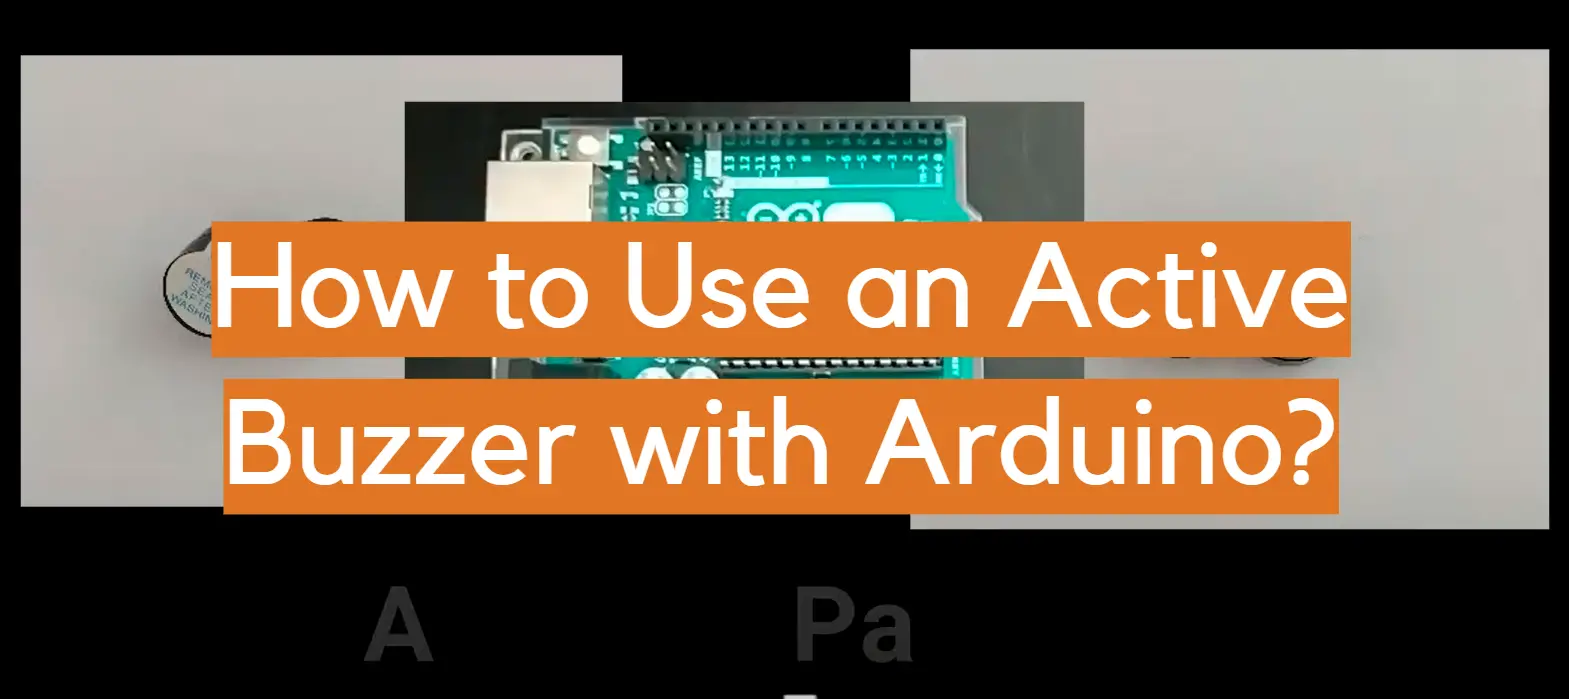 How to Use an Active Buzzer with Arduino?